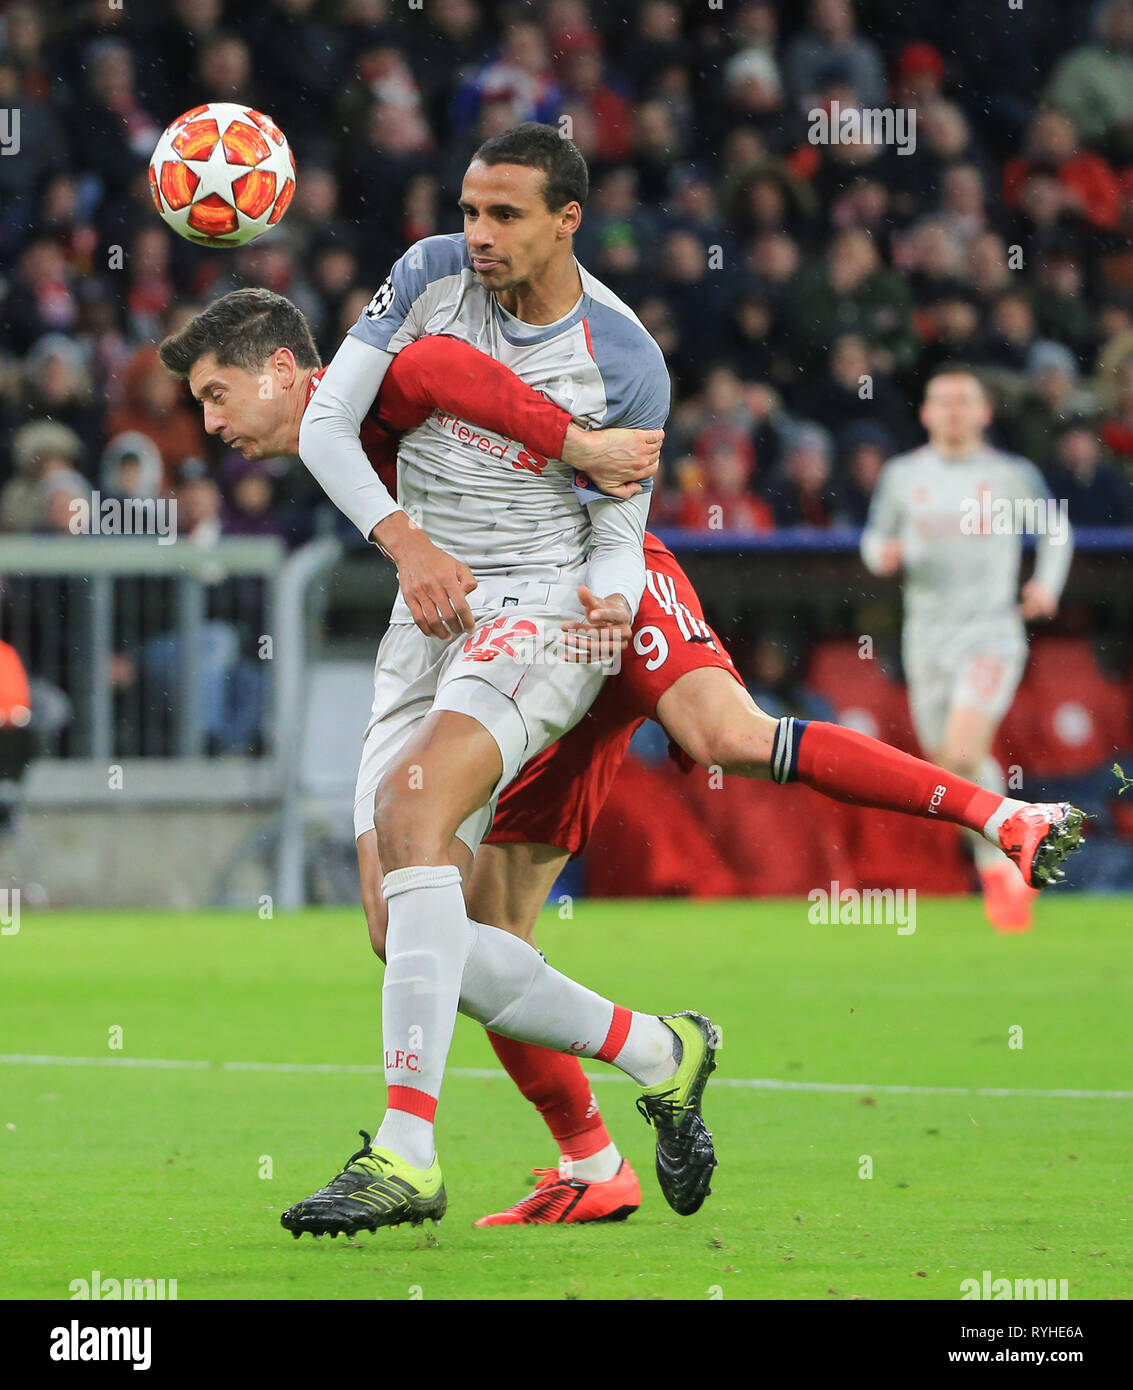 Munich, Germany. 13th Mar, 2019. Liverpool's Joel Matip (front) vies with Bayern Munich's Robert Lewandowski during the UEFA Champions League 1/8 finals second leg match between Bayern Munich of Germany and Liverpool of England in Munich, Germany, on March 13, 2019. Liverpool won 3-1 and advanced into the quarterfinals. Credit: Philippe Ruiz/Xinhua/Alamy Live News Stock Photo